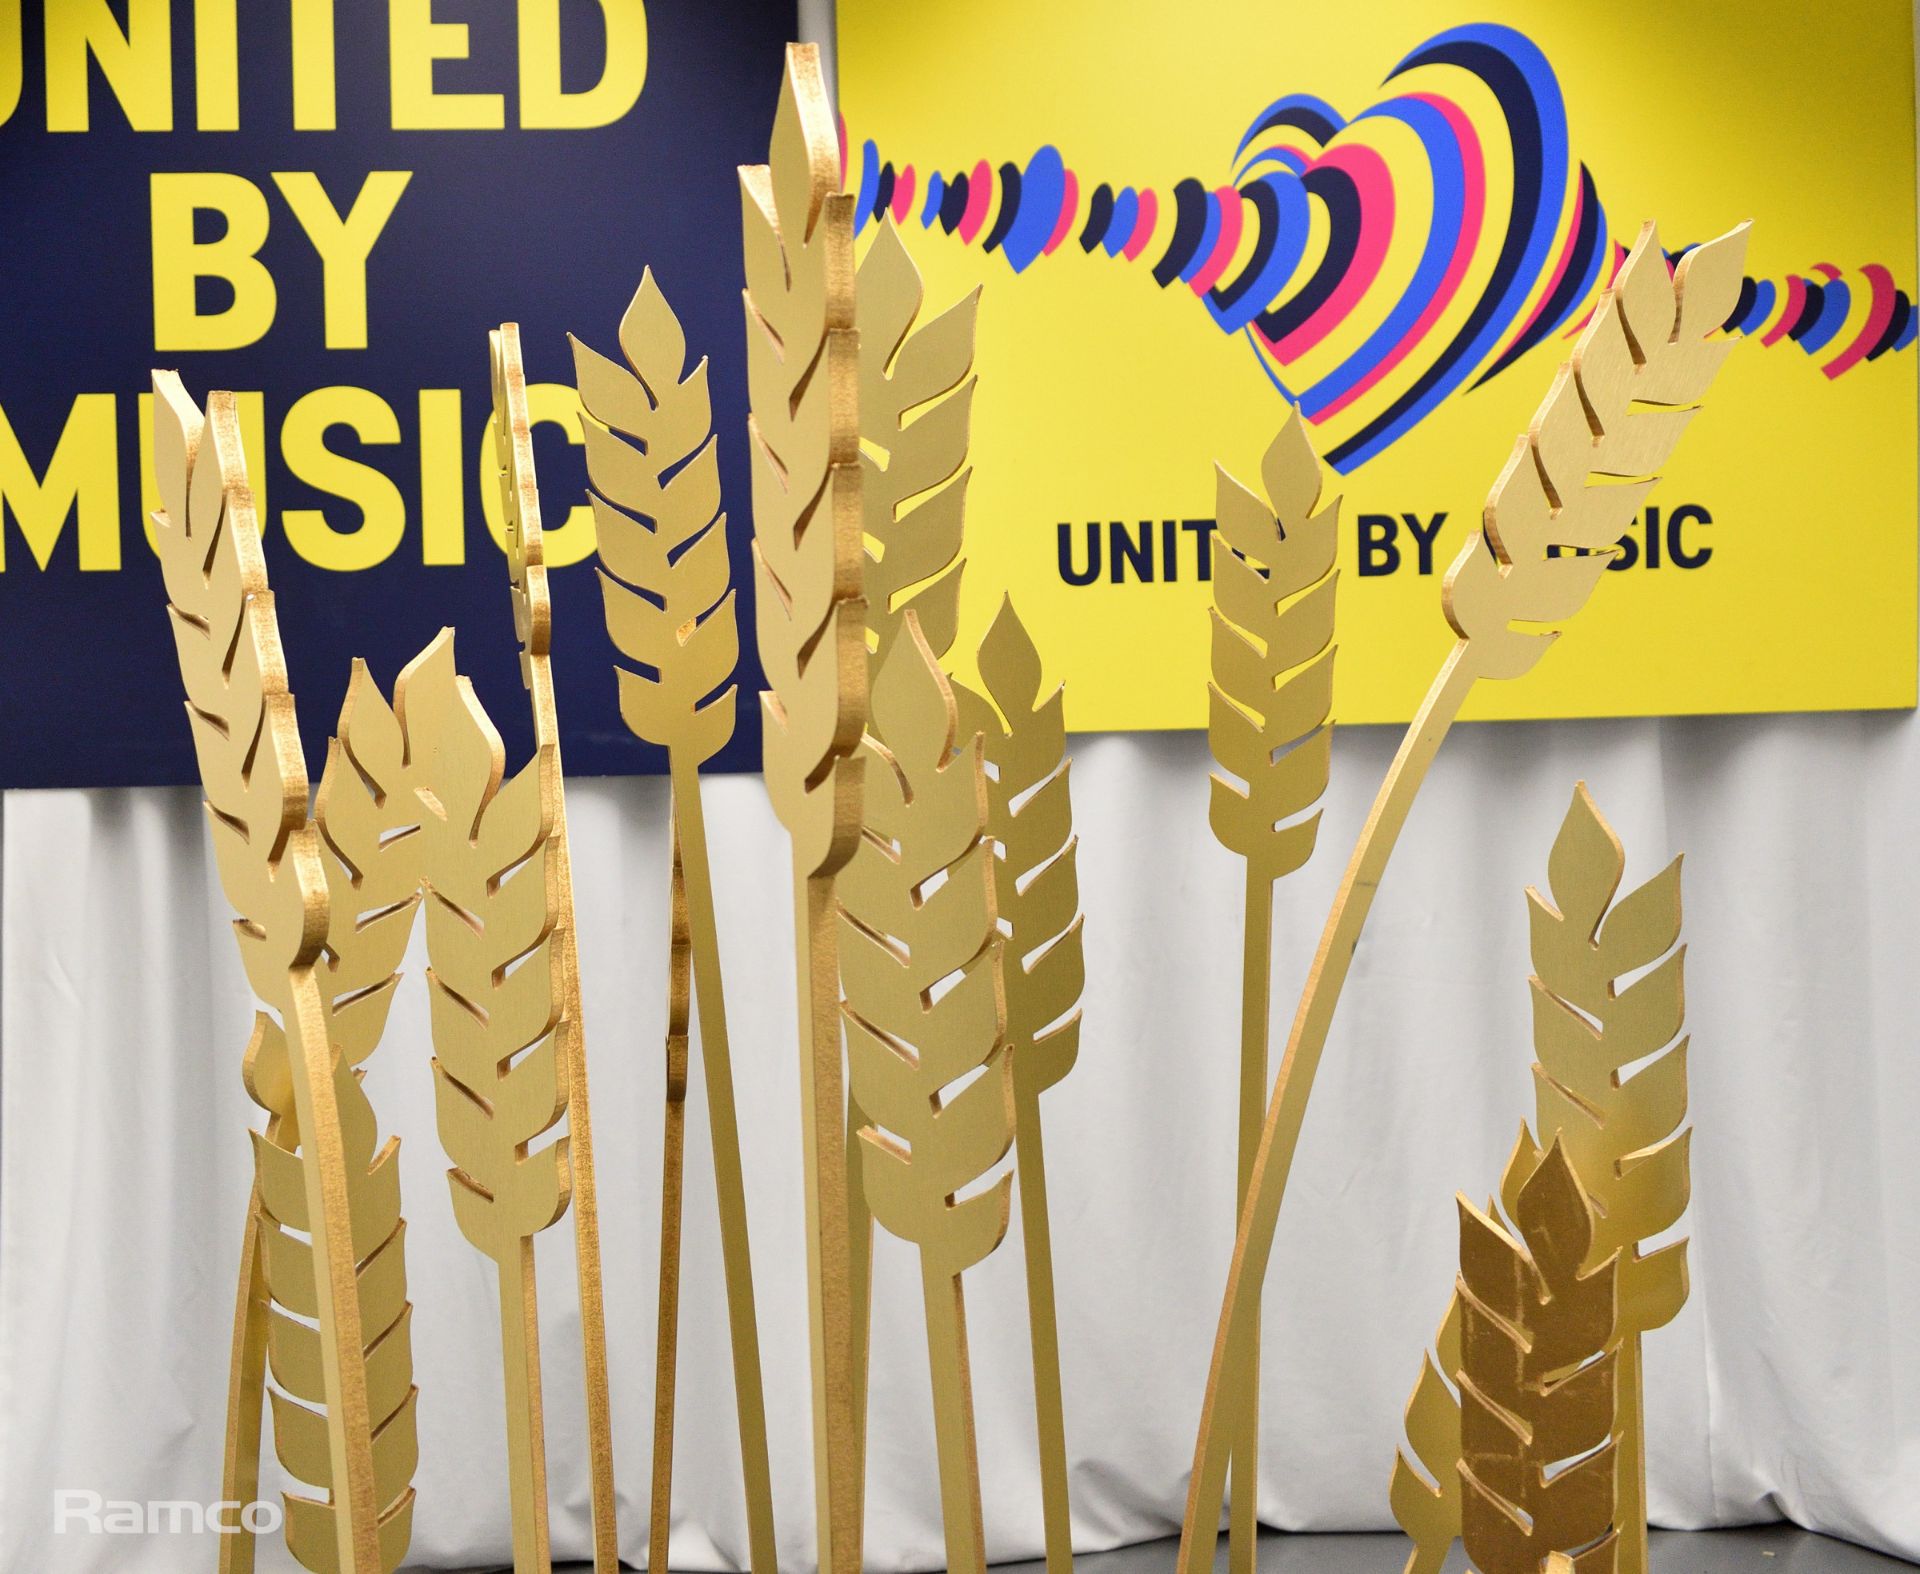 Wheat sheaf stage decoration used in the 'United by Music' performance by Mariya Yaremchuck - Image 2 of 7